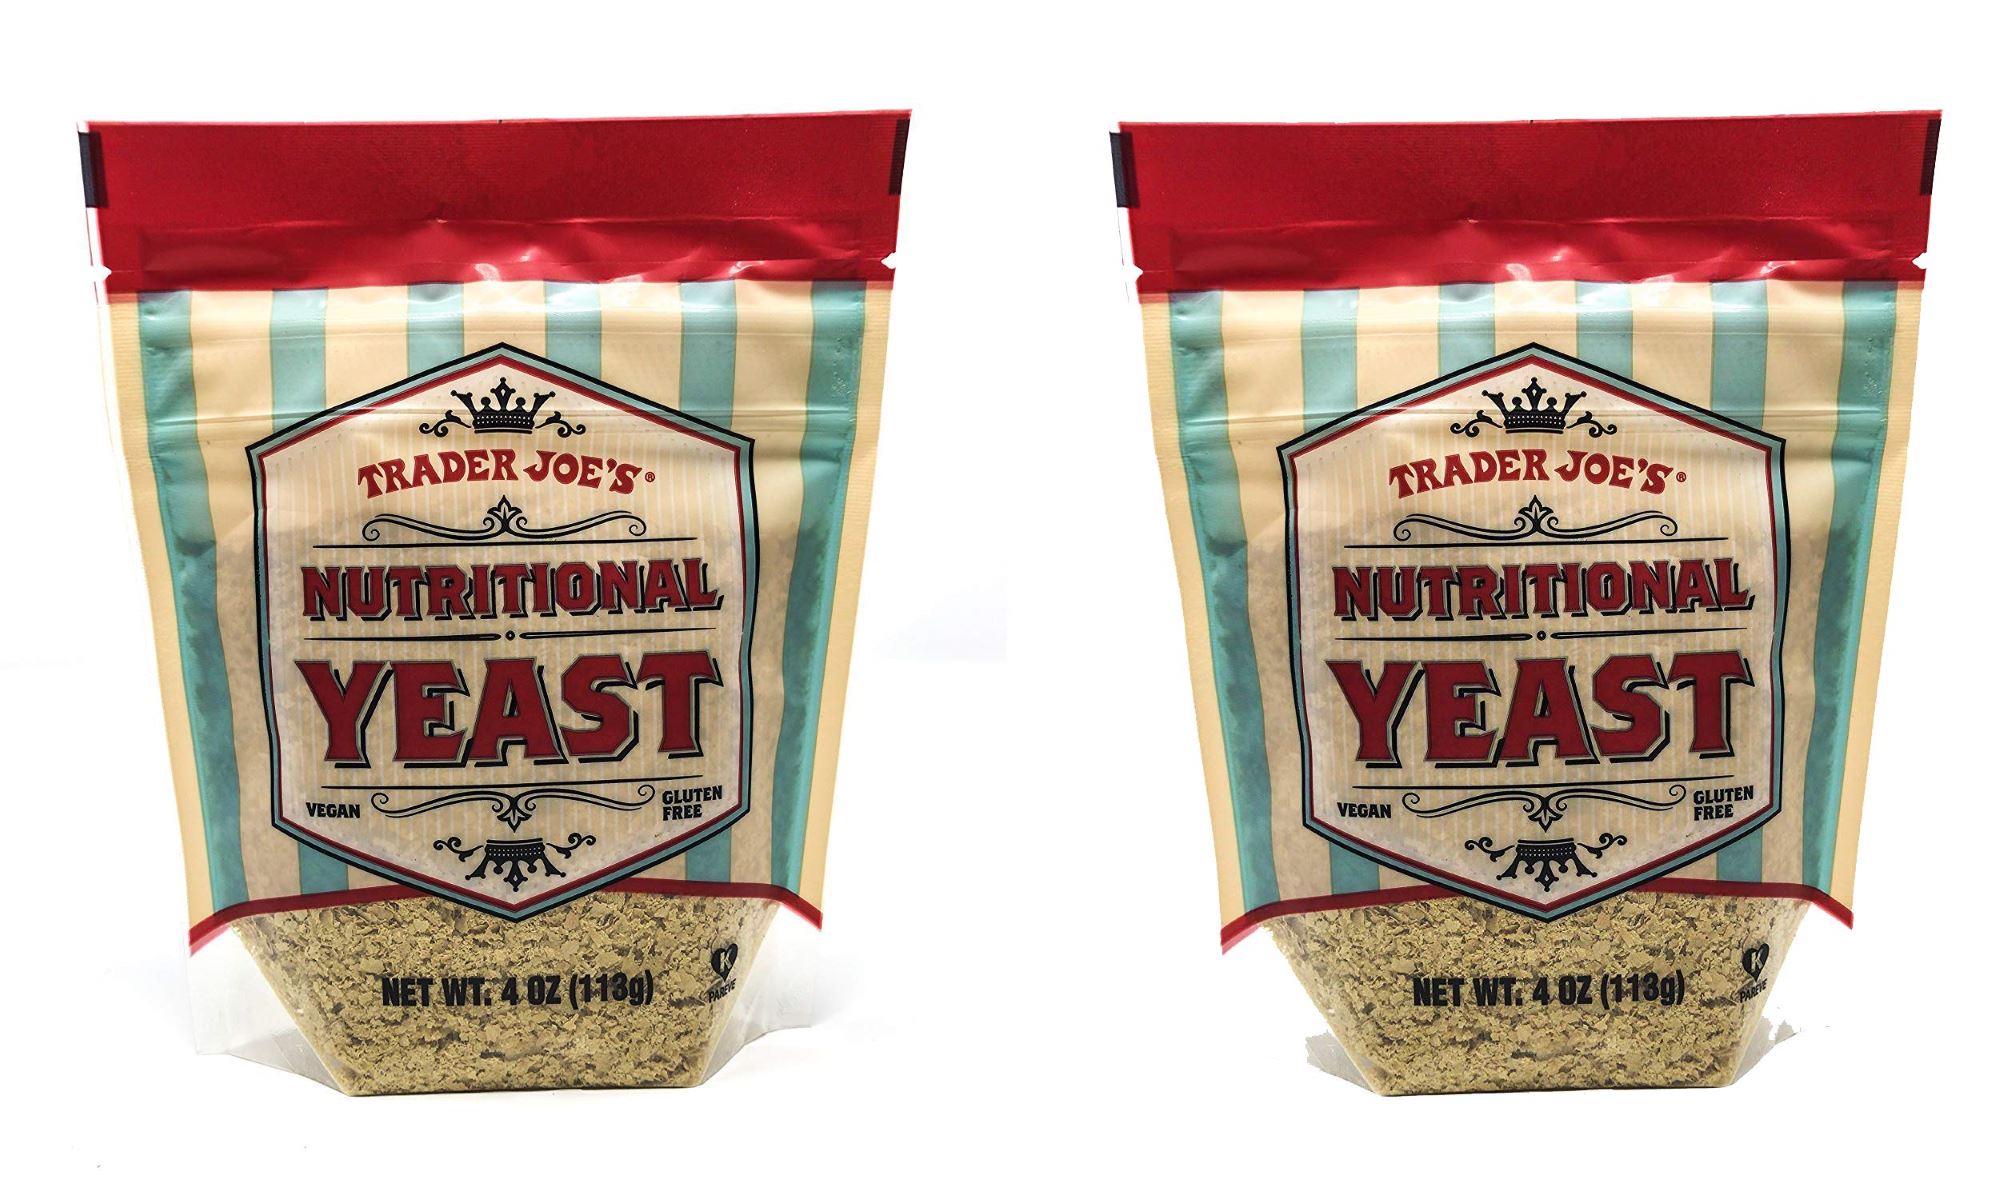 18-trader-joes-nutritional-yeast-nutrition-facts